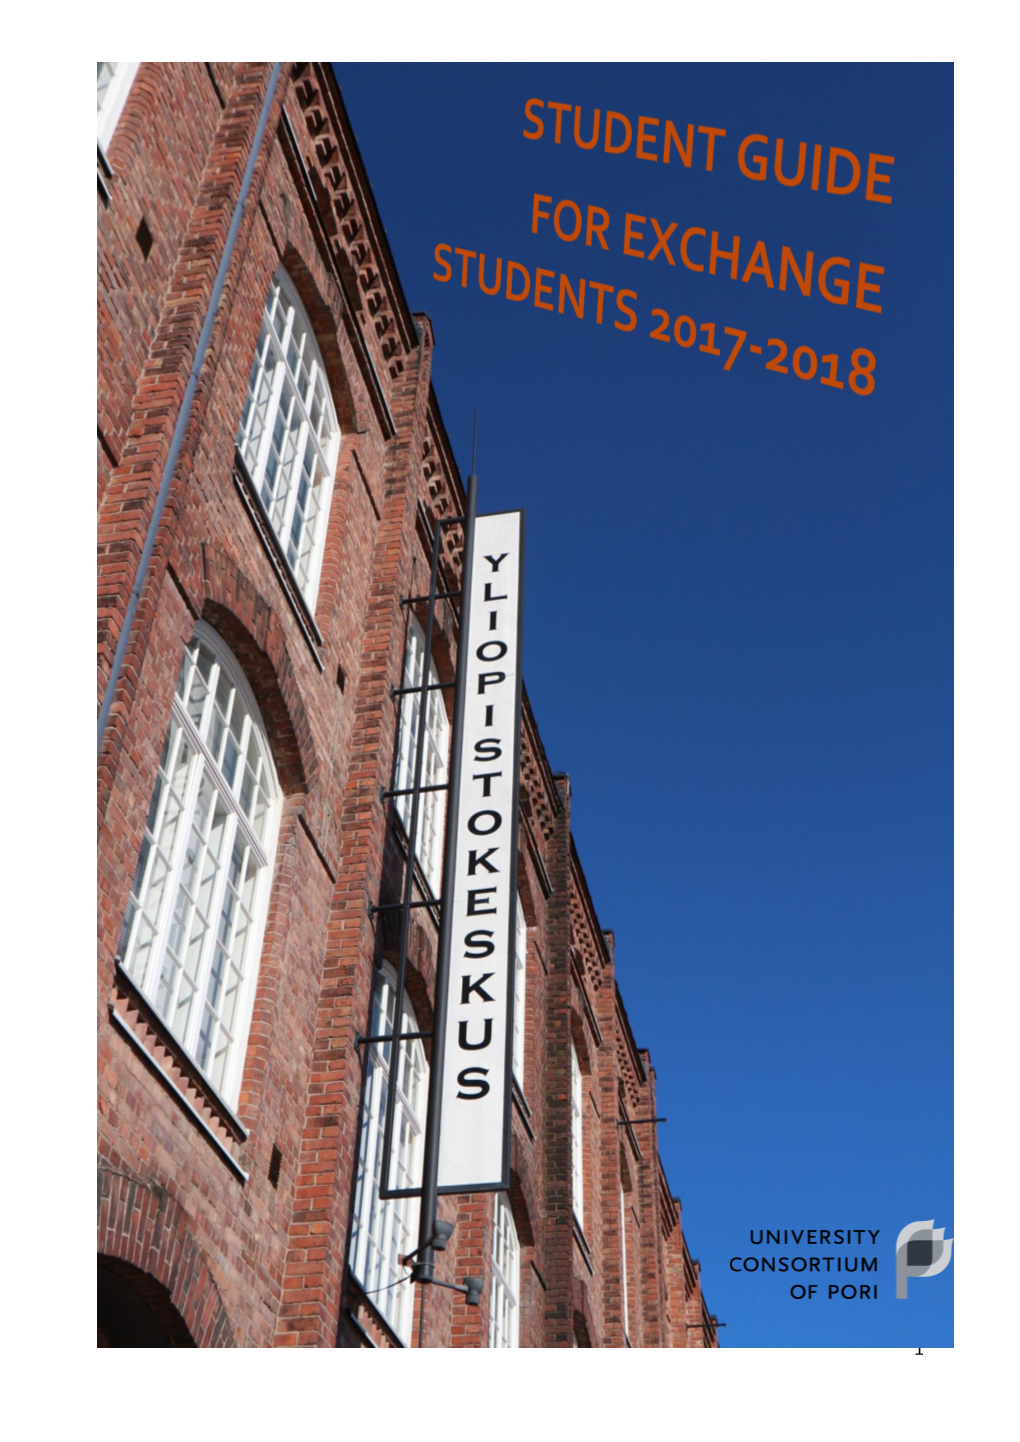 Ucpori Student Guide for Exchange